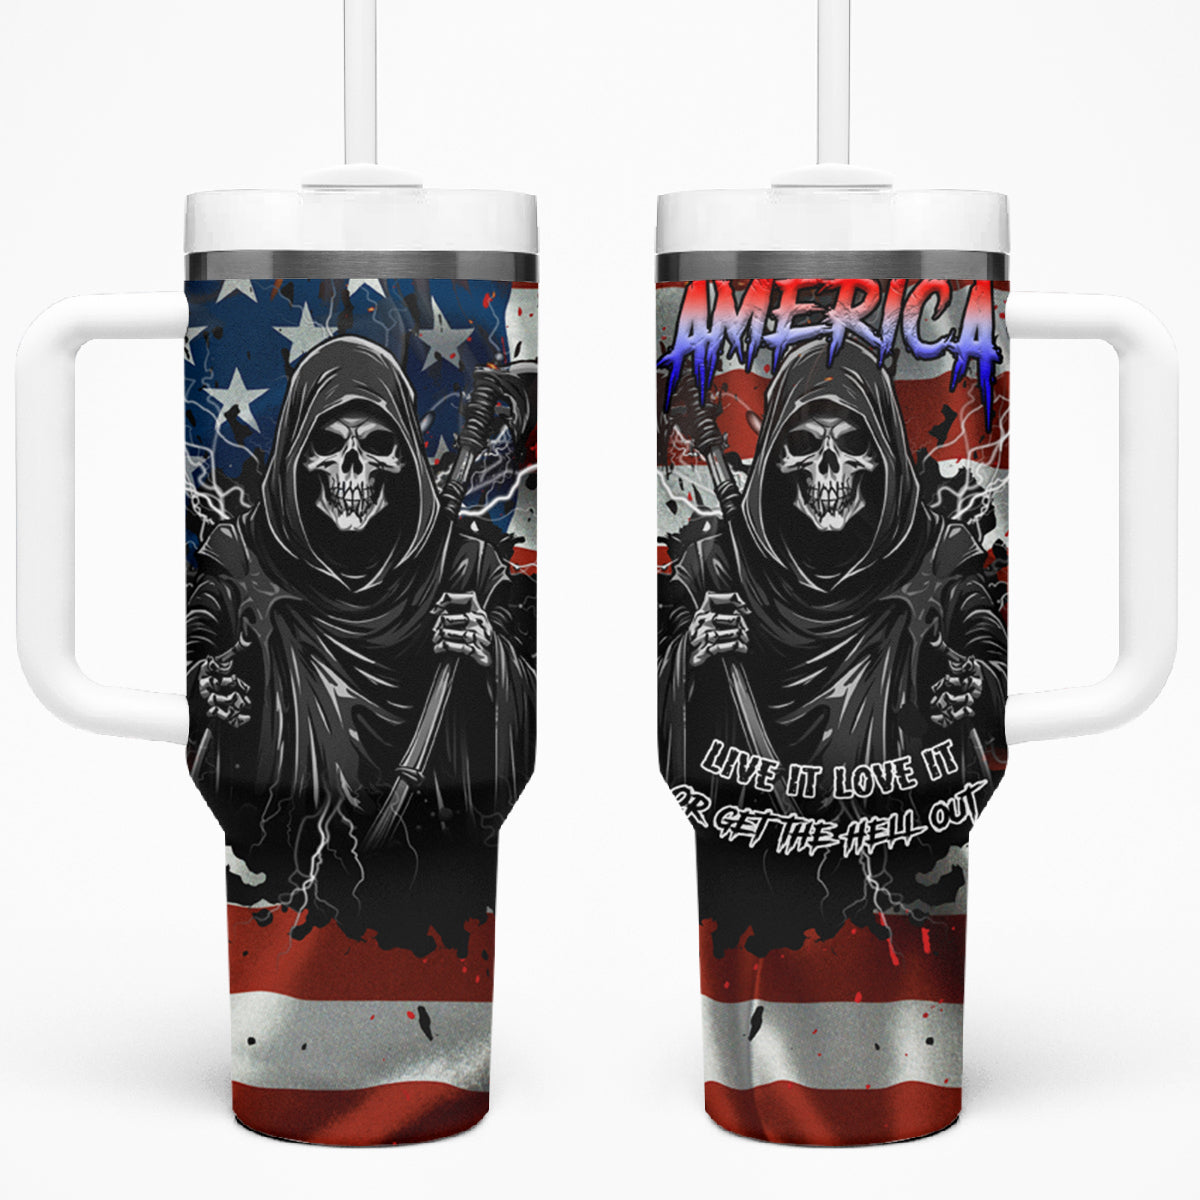 America Live It Love it Or Get the Hell Out Tumbler With Handle